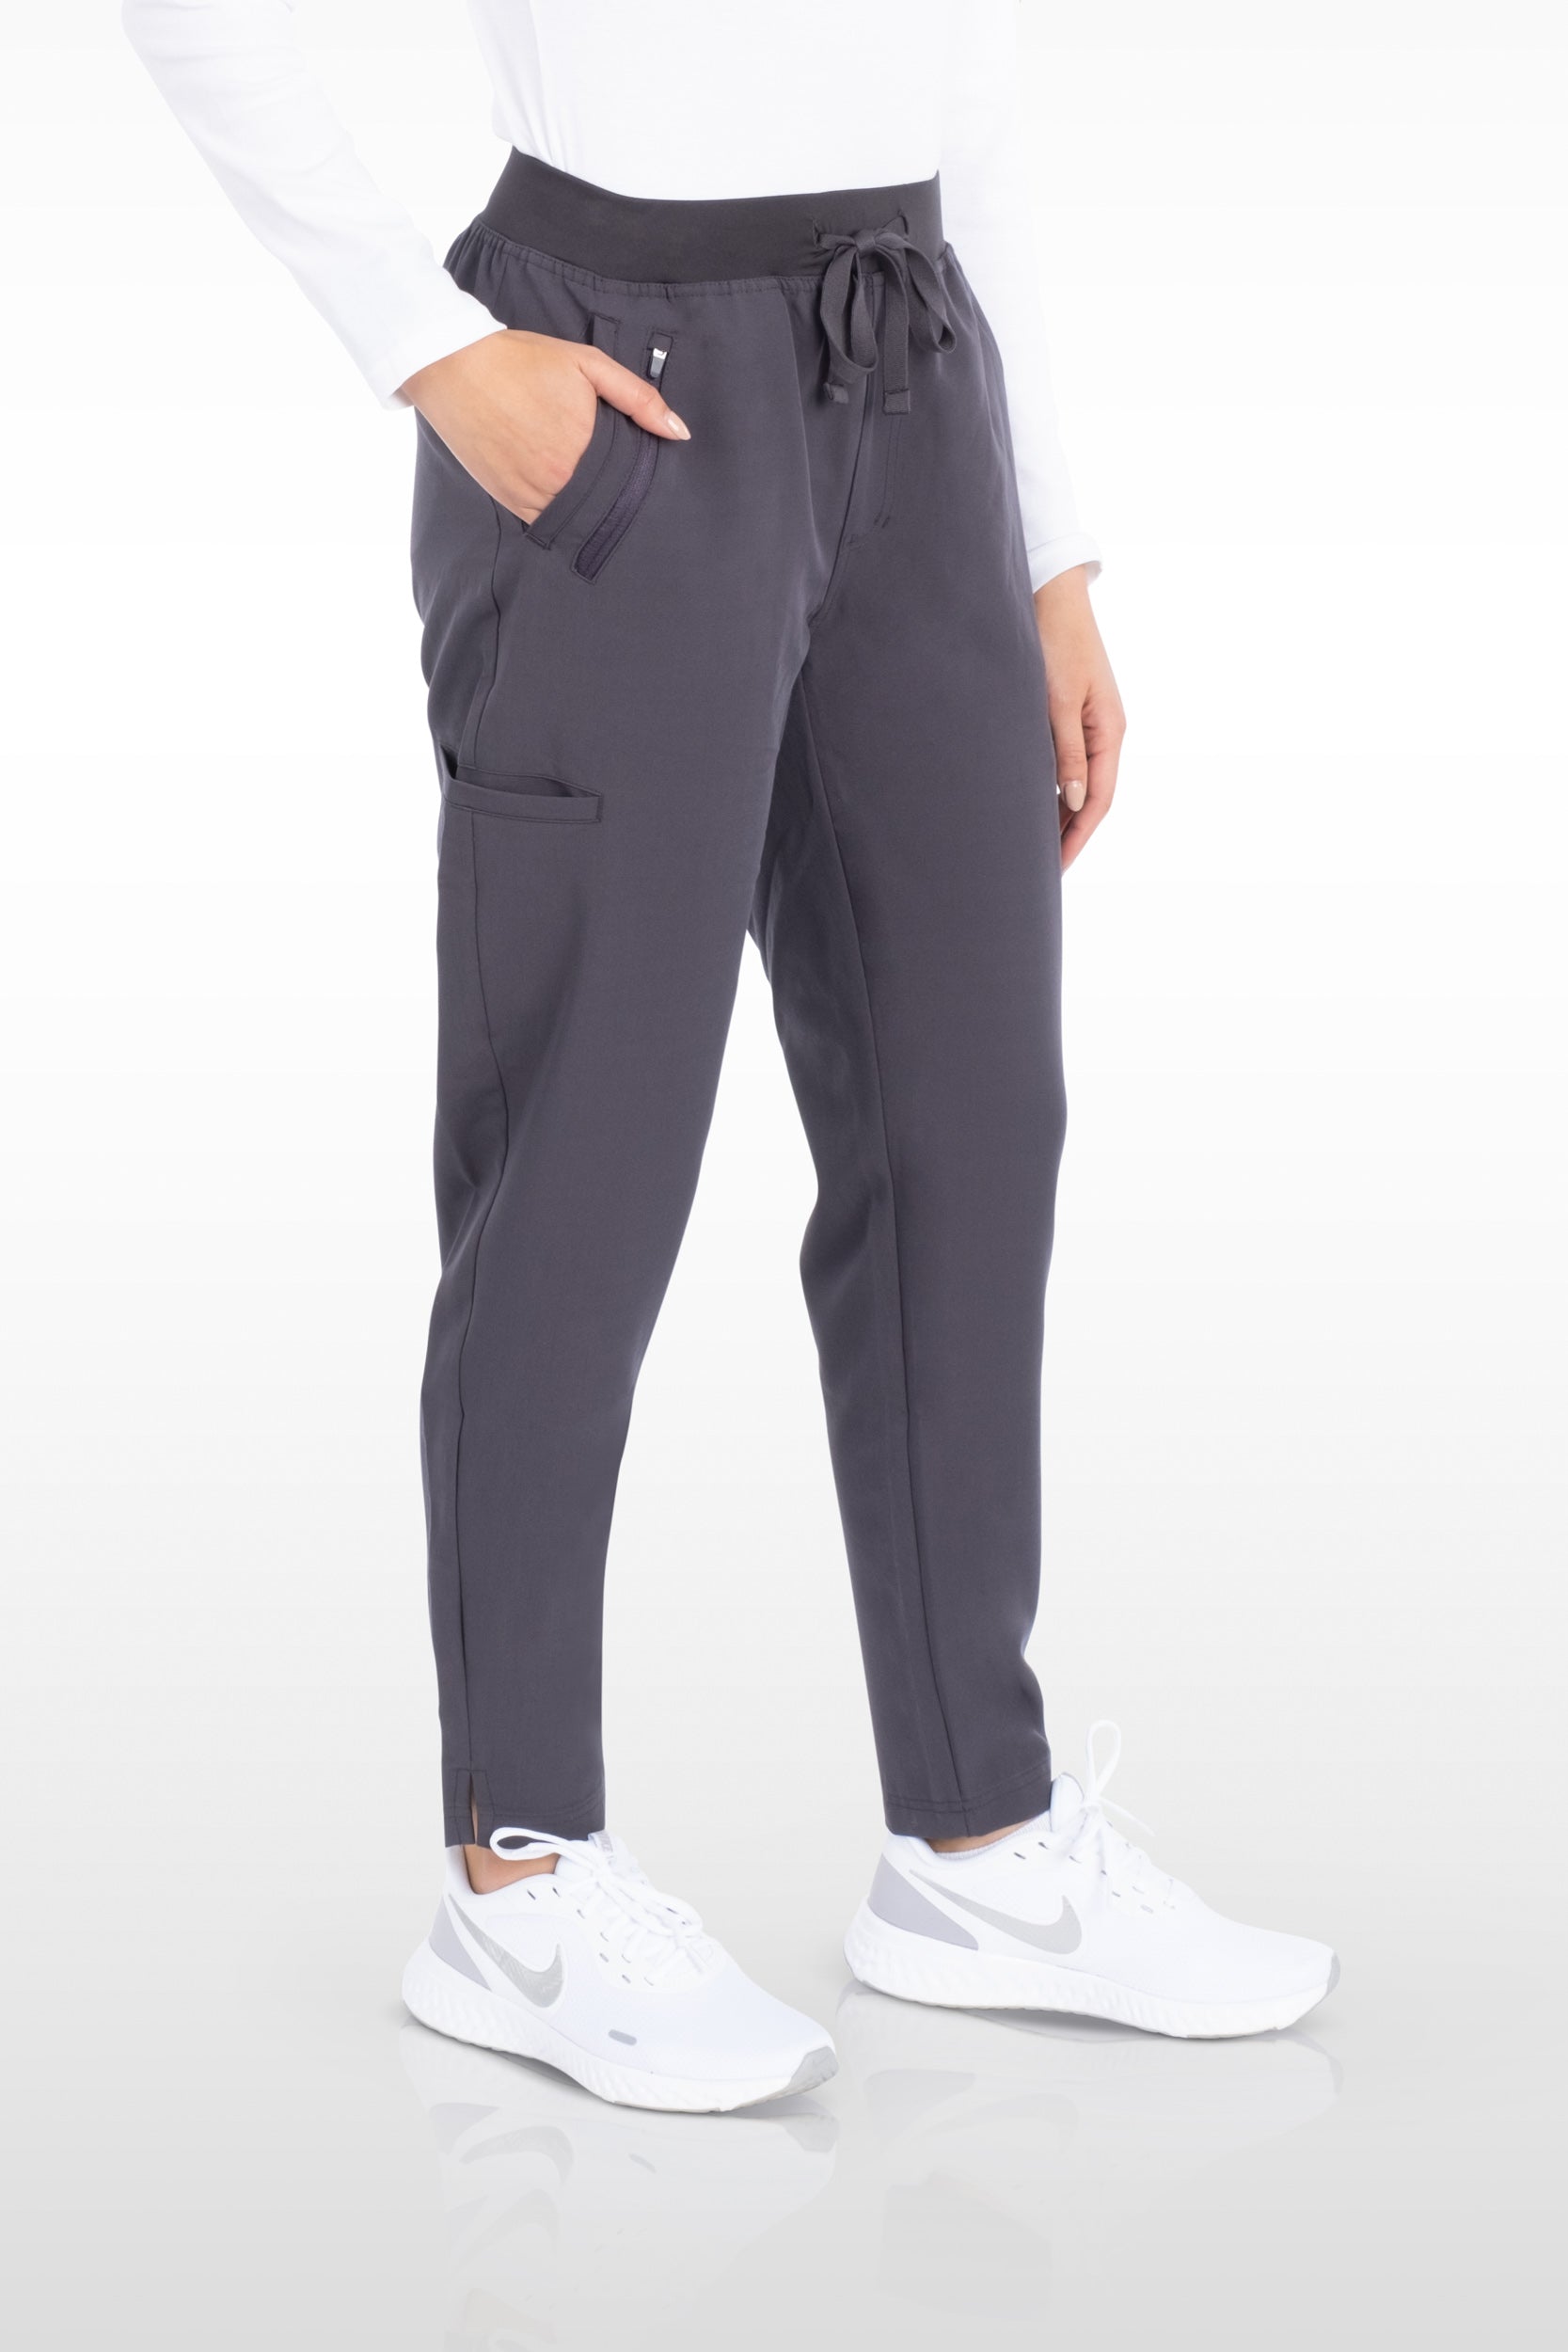 Pearl Womens Yoga Pant with 7 Pockets - Regular (13030R)